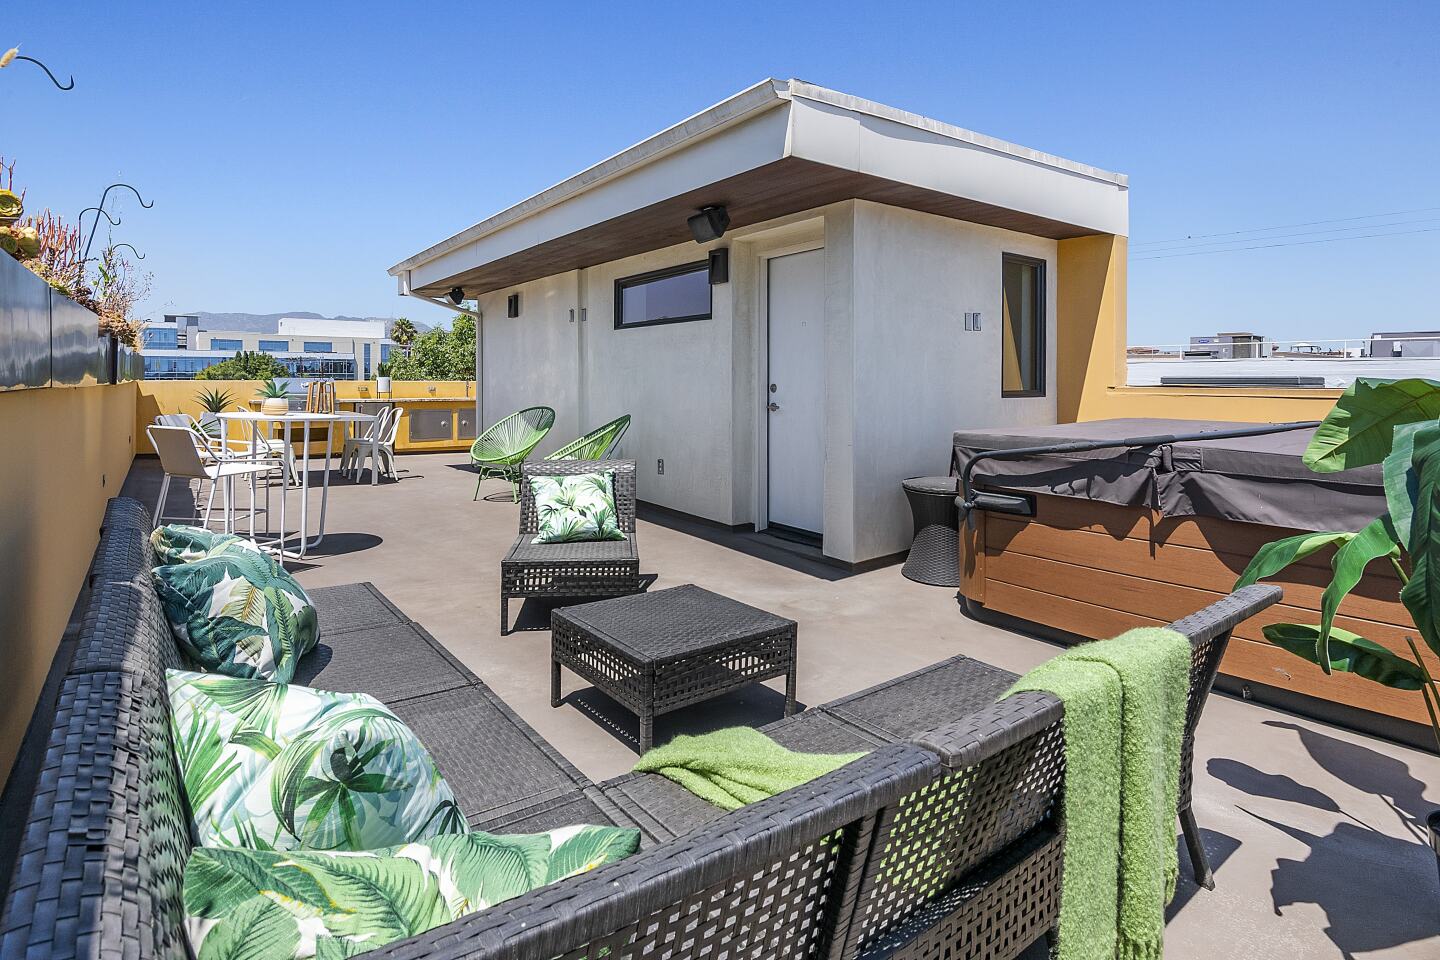 The rooftop deck has a spa.